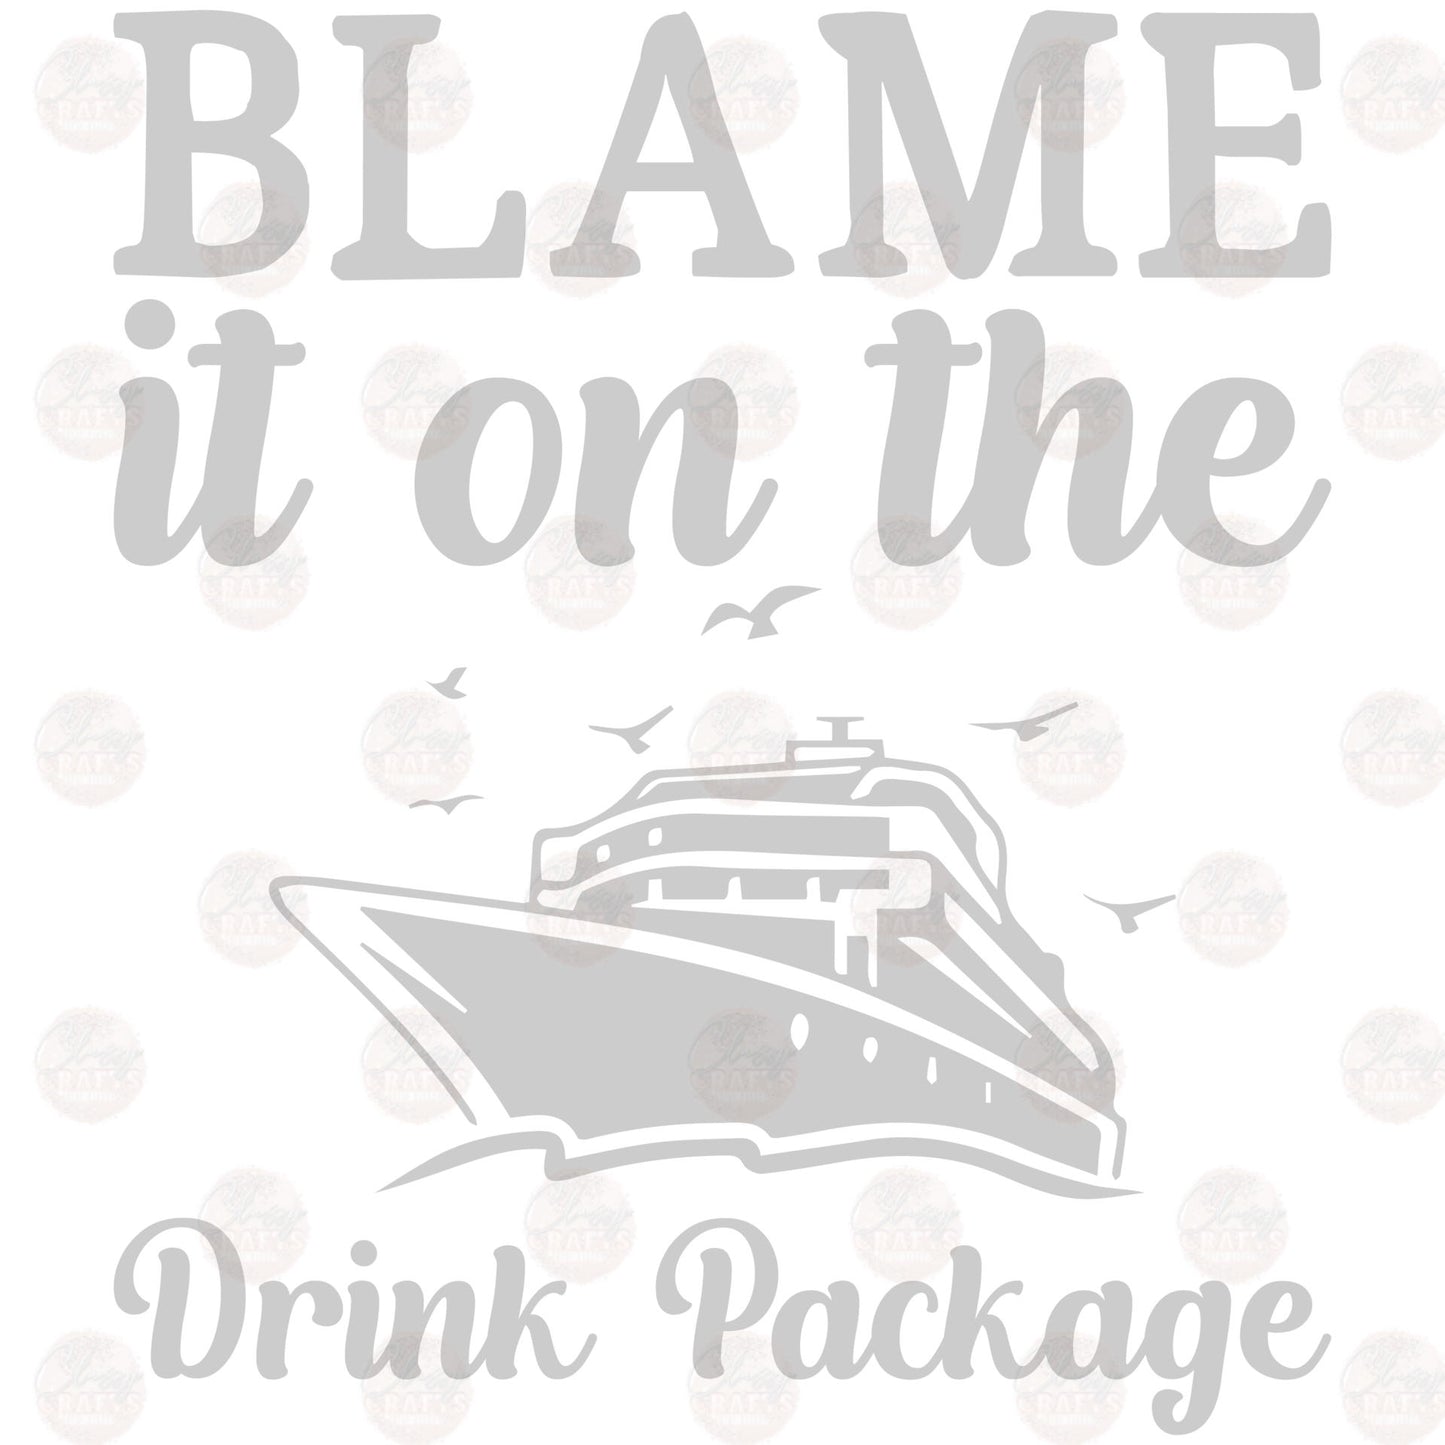 Blame It On The Drink Package Ship Transfer